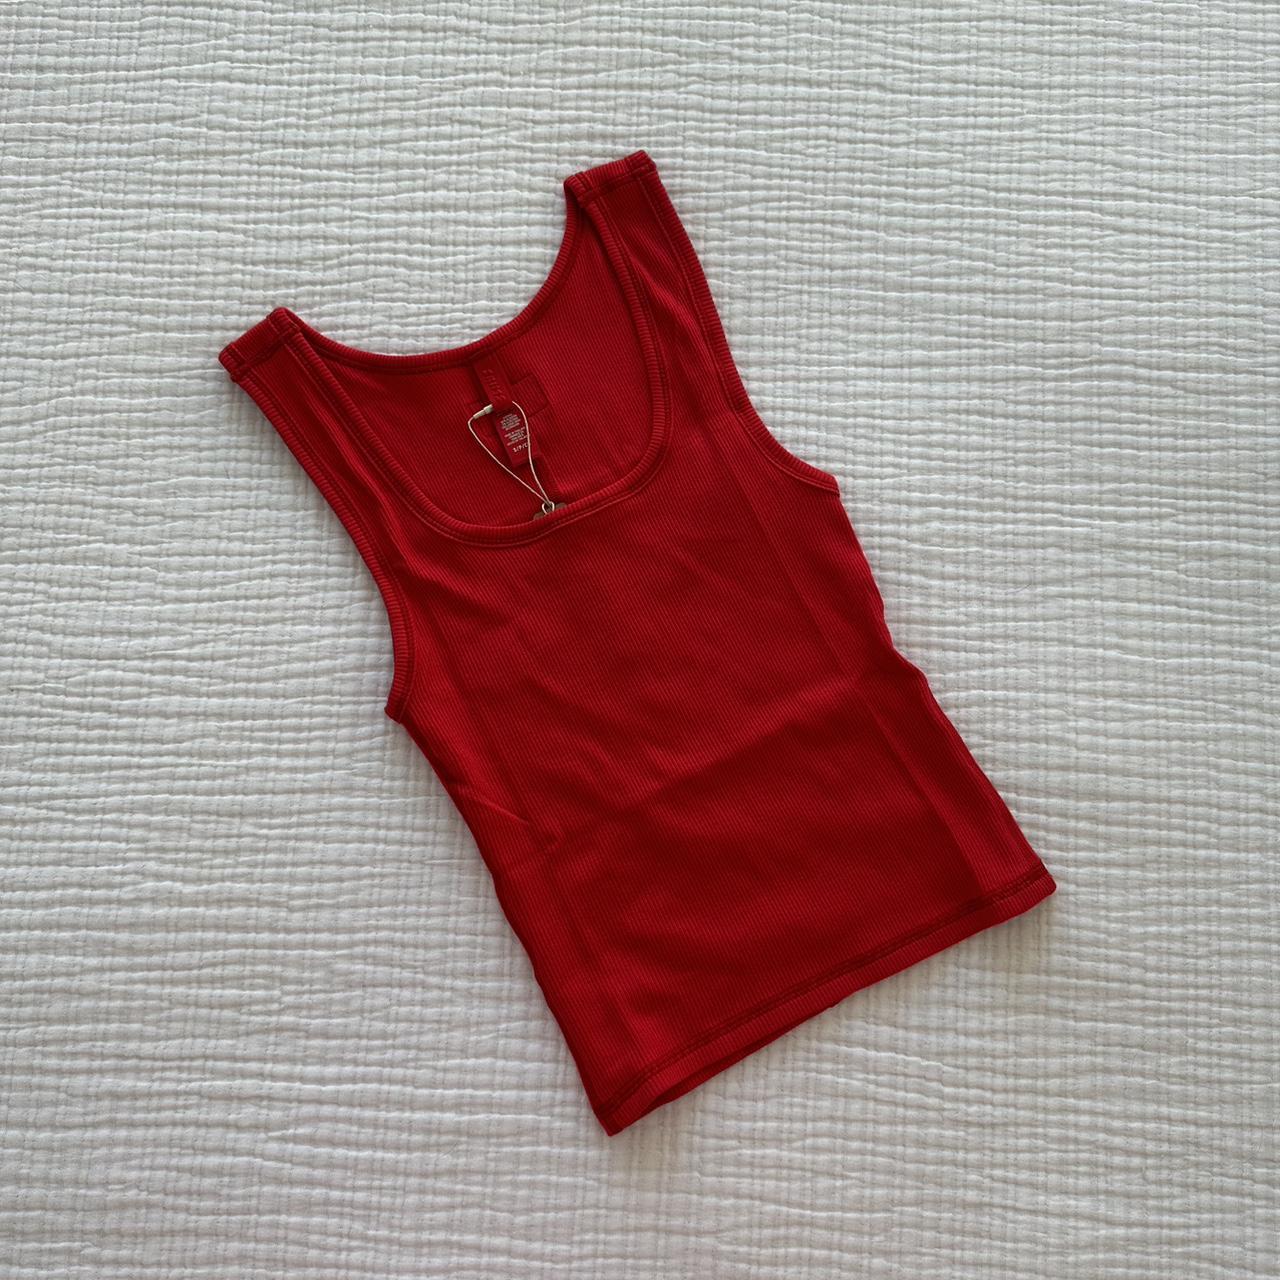 Skims Cotton Rib Tank in the color “Red - Depop